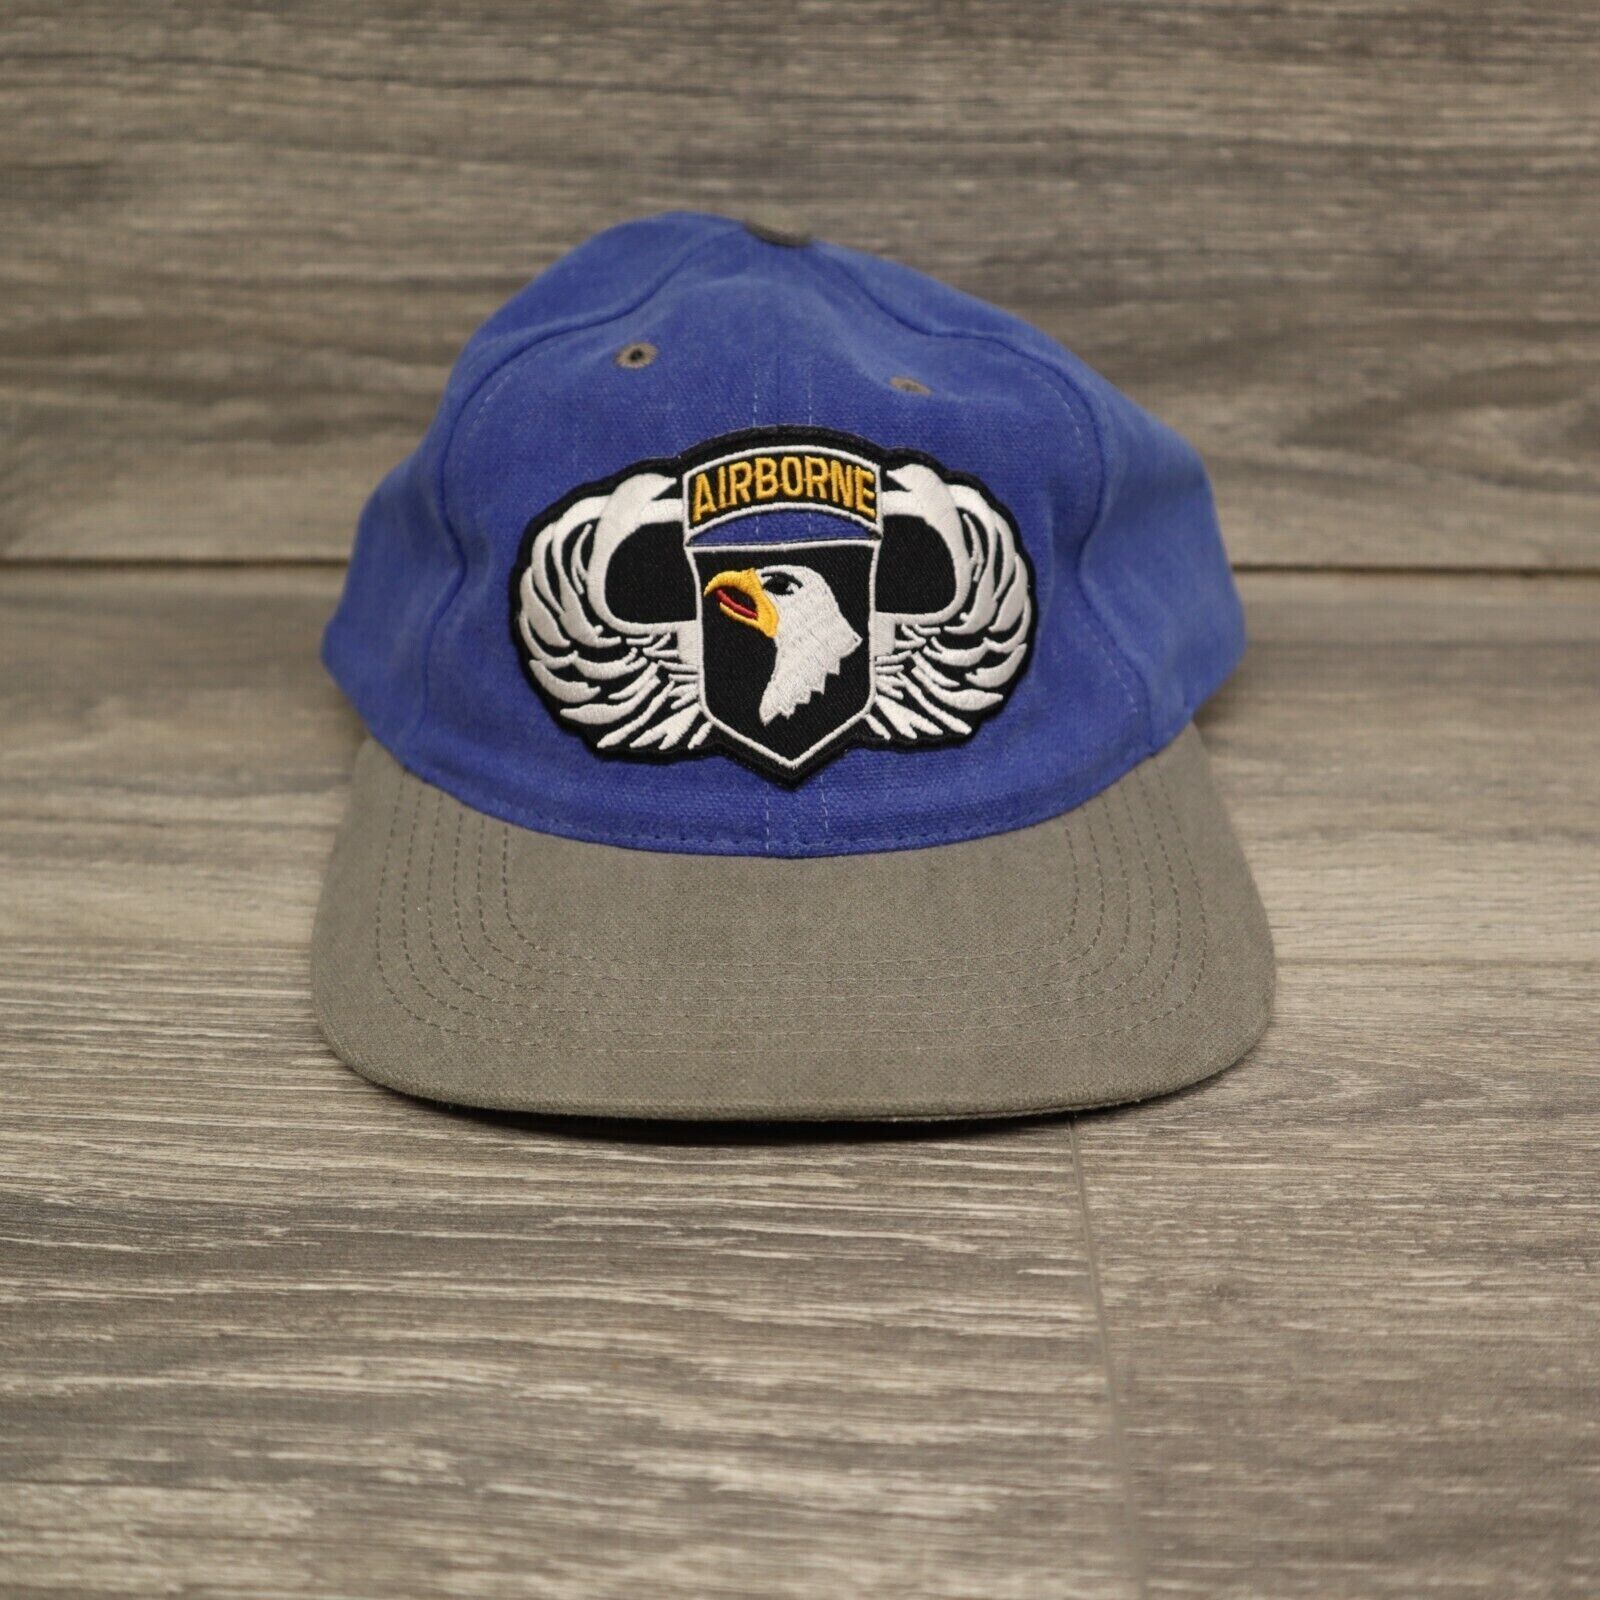 Primary image for Blue Baseball Cap AIRBORNE DIVISION SCREAMING EAGLES US ARMY